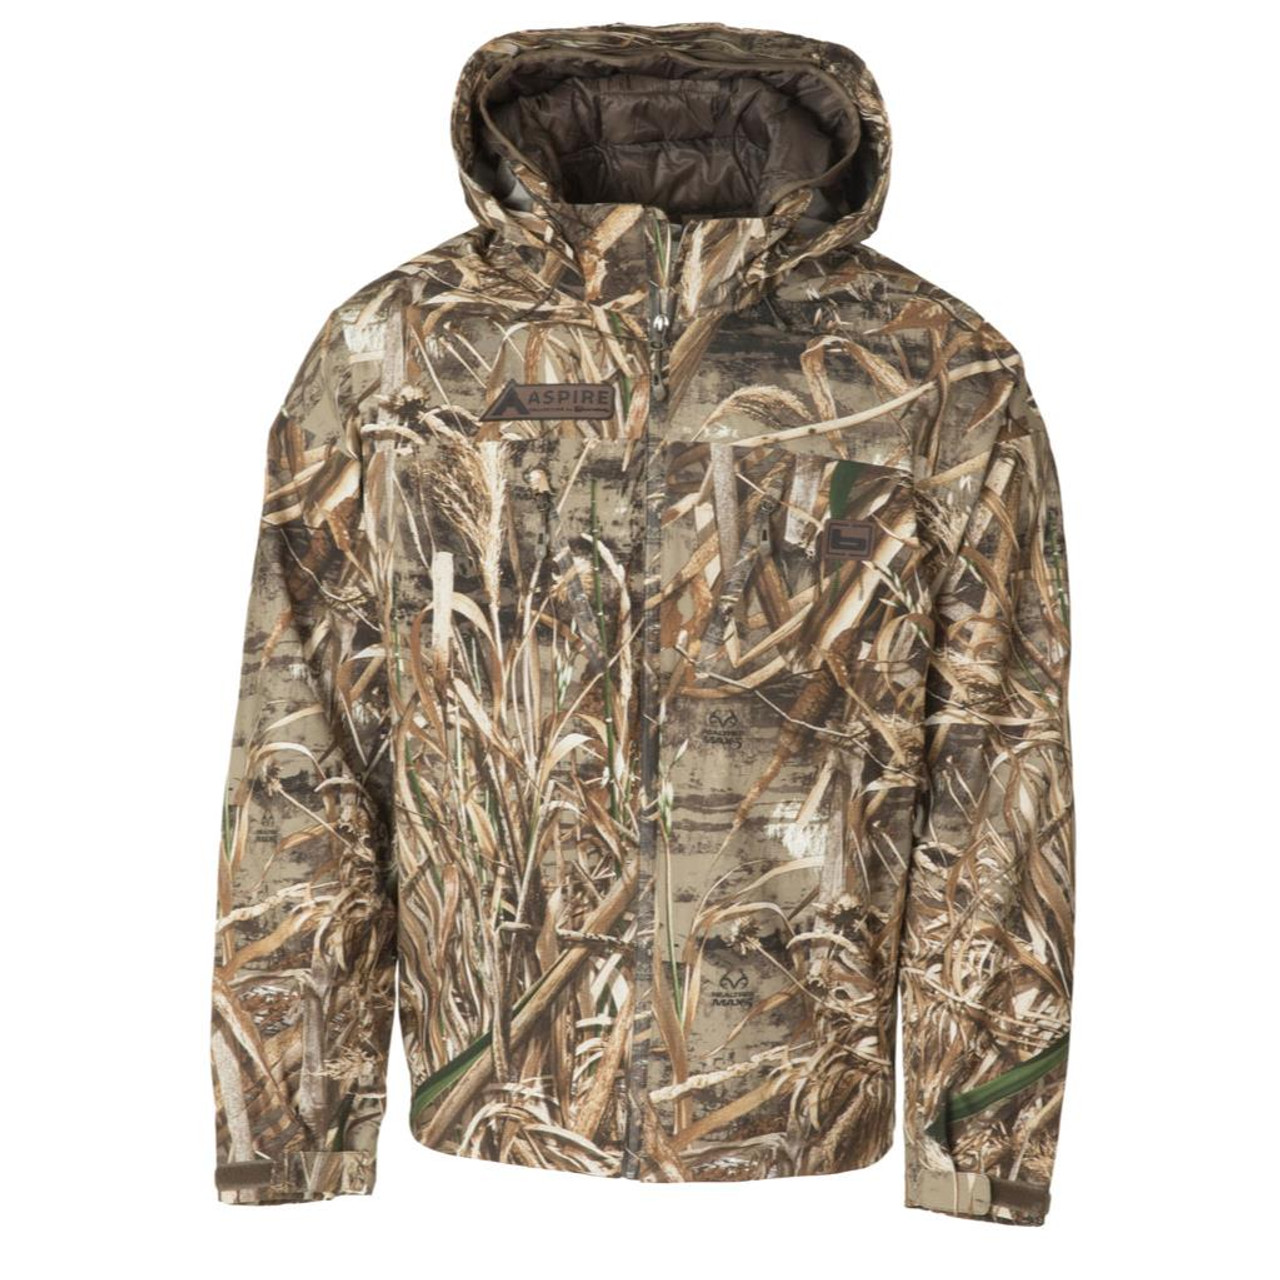 Banded Aspire Catalyst 3 in 1 Insulated Wader Jacket - Presleys Outdoors